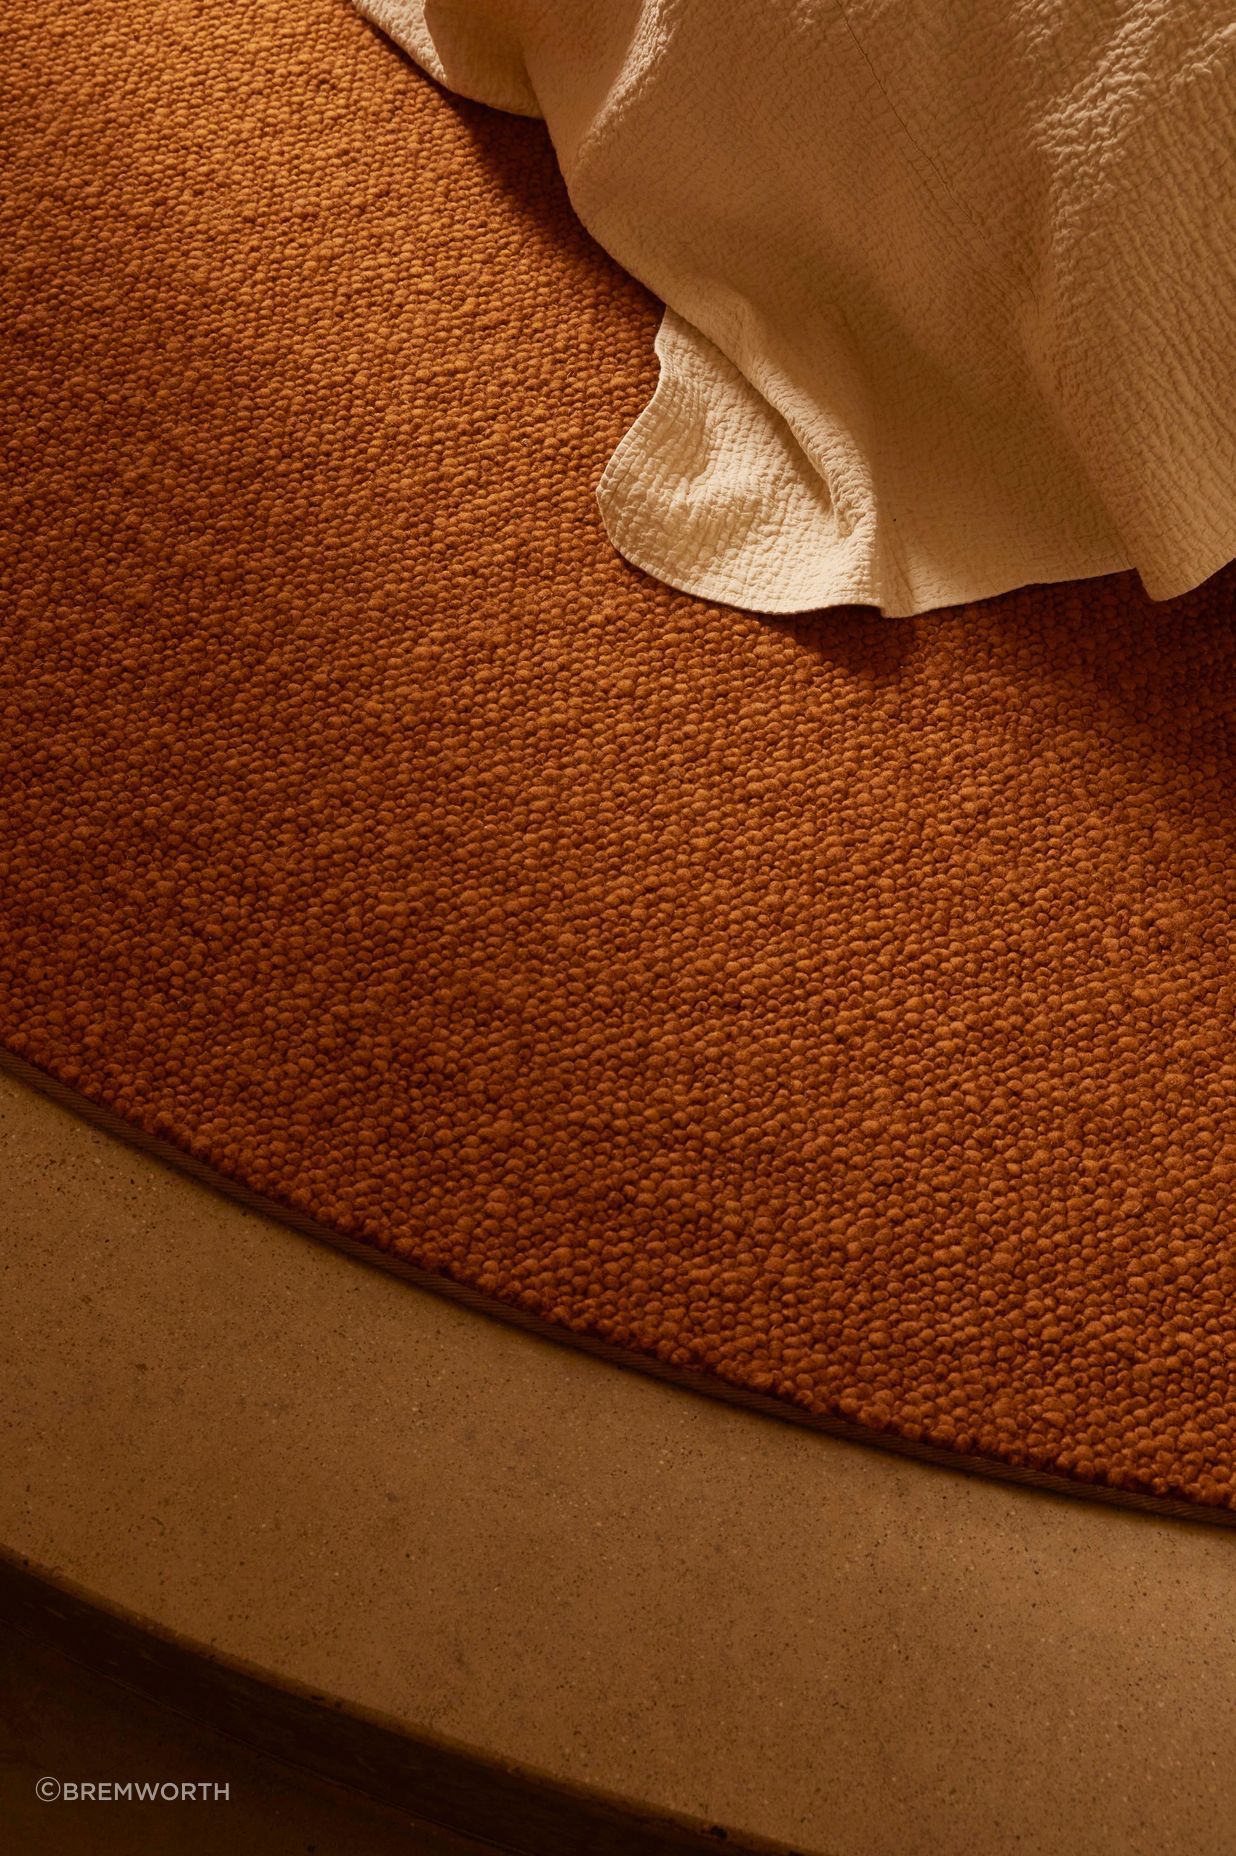 Edging options include overlocked, concealed, and fabric, available on rectangle, square, and round-shaped rugs.